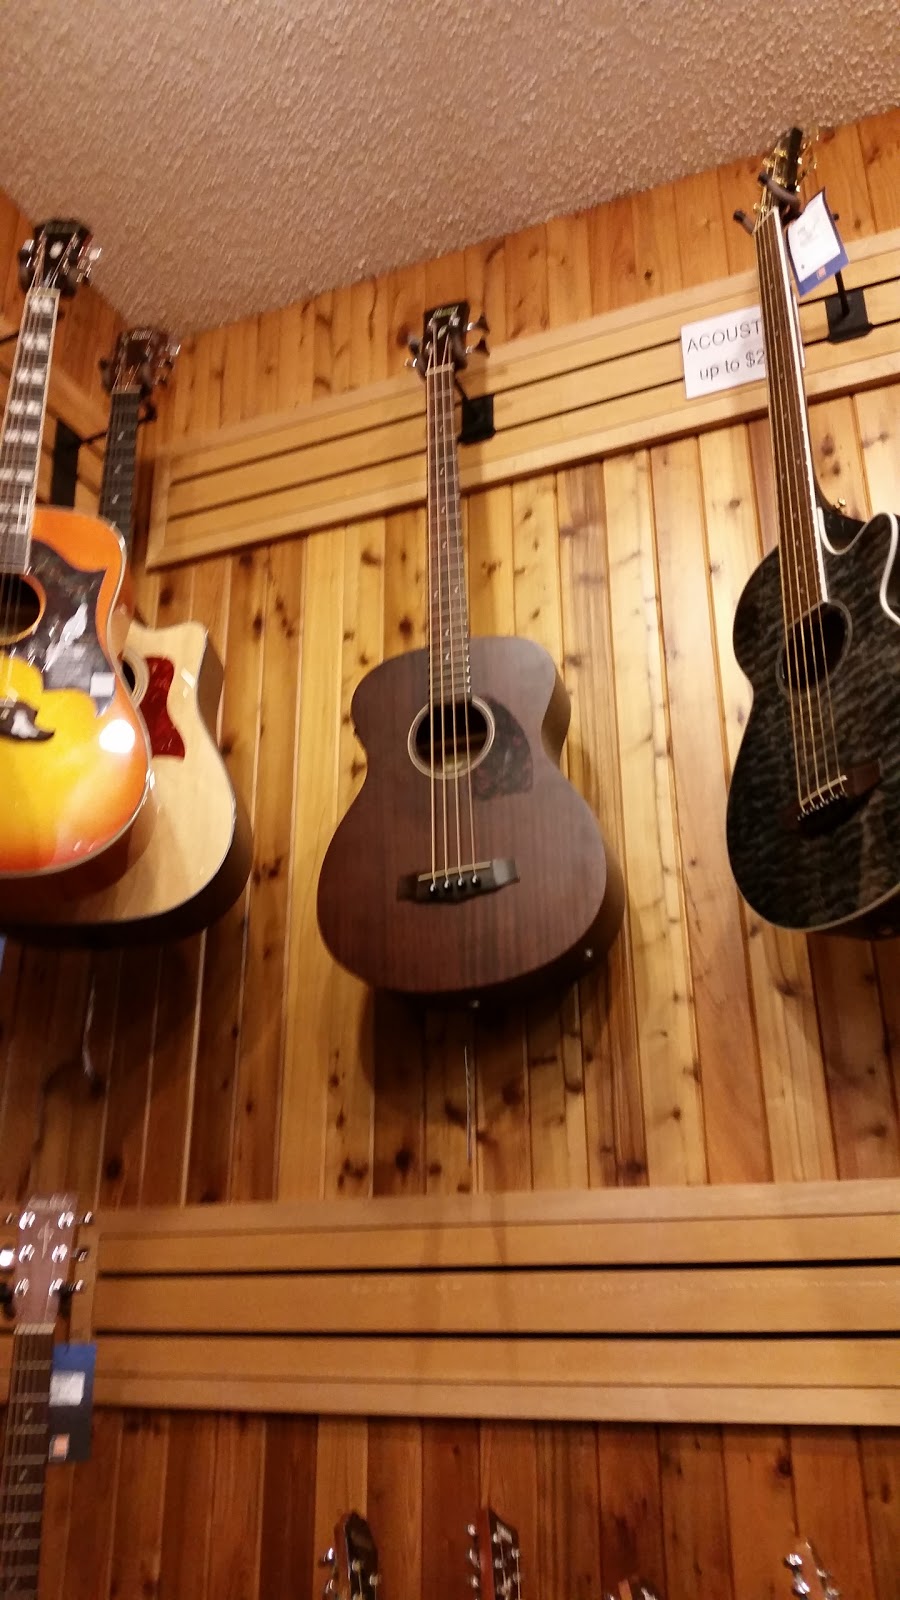 Long & McQuade Musical Instruments | electronics store | 10204 107 Ave, Edmonton, AB T5H 4A5, Canada | 7804234448 OR +1 780-423-4448